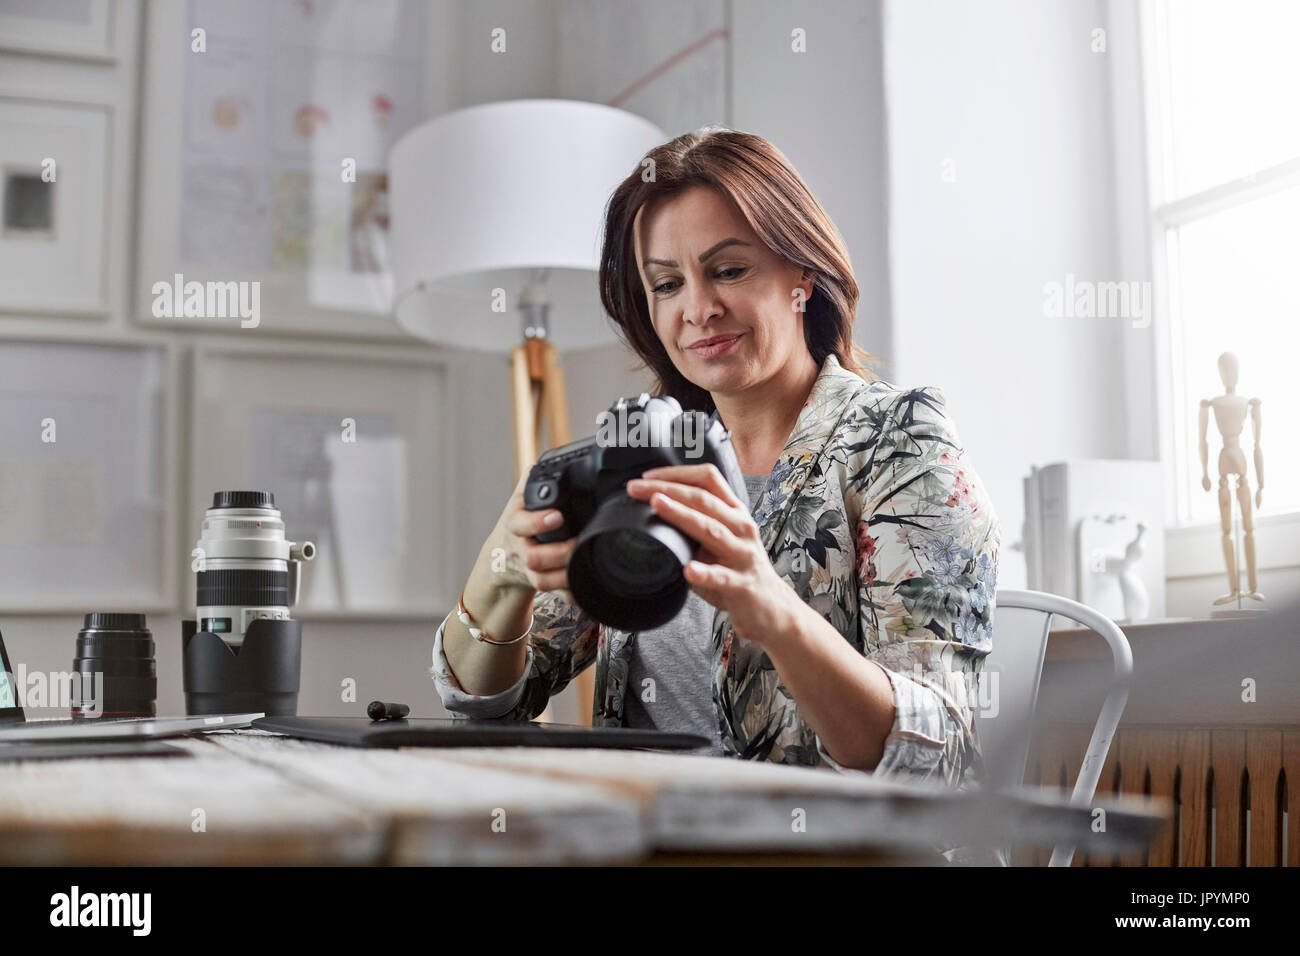 Femme photographe using digital camera in office Banque D'Images